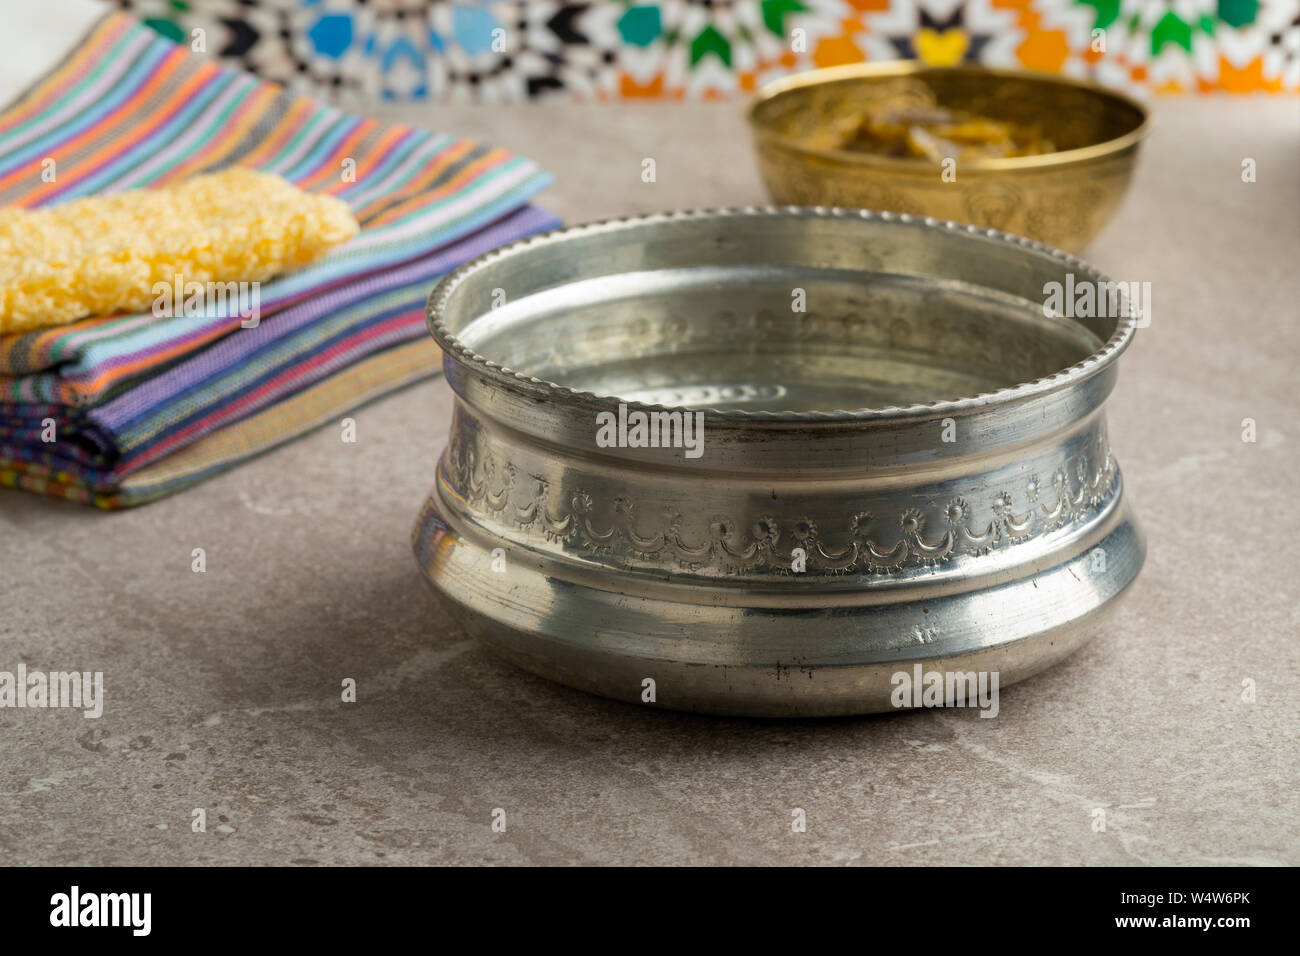 Decorated silver colored metal Hammam water bowl Stock Photo